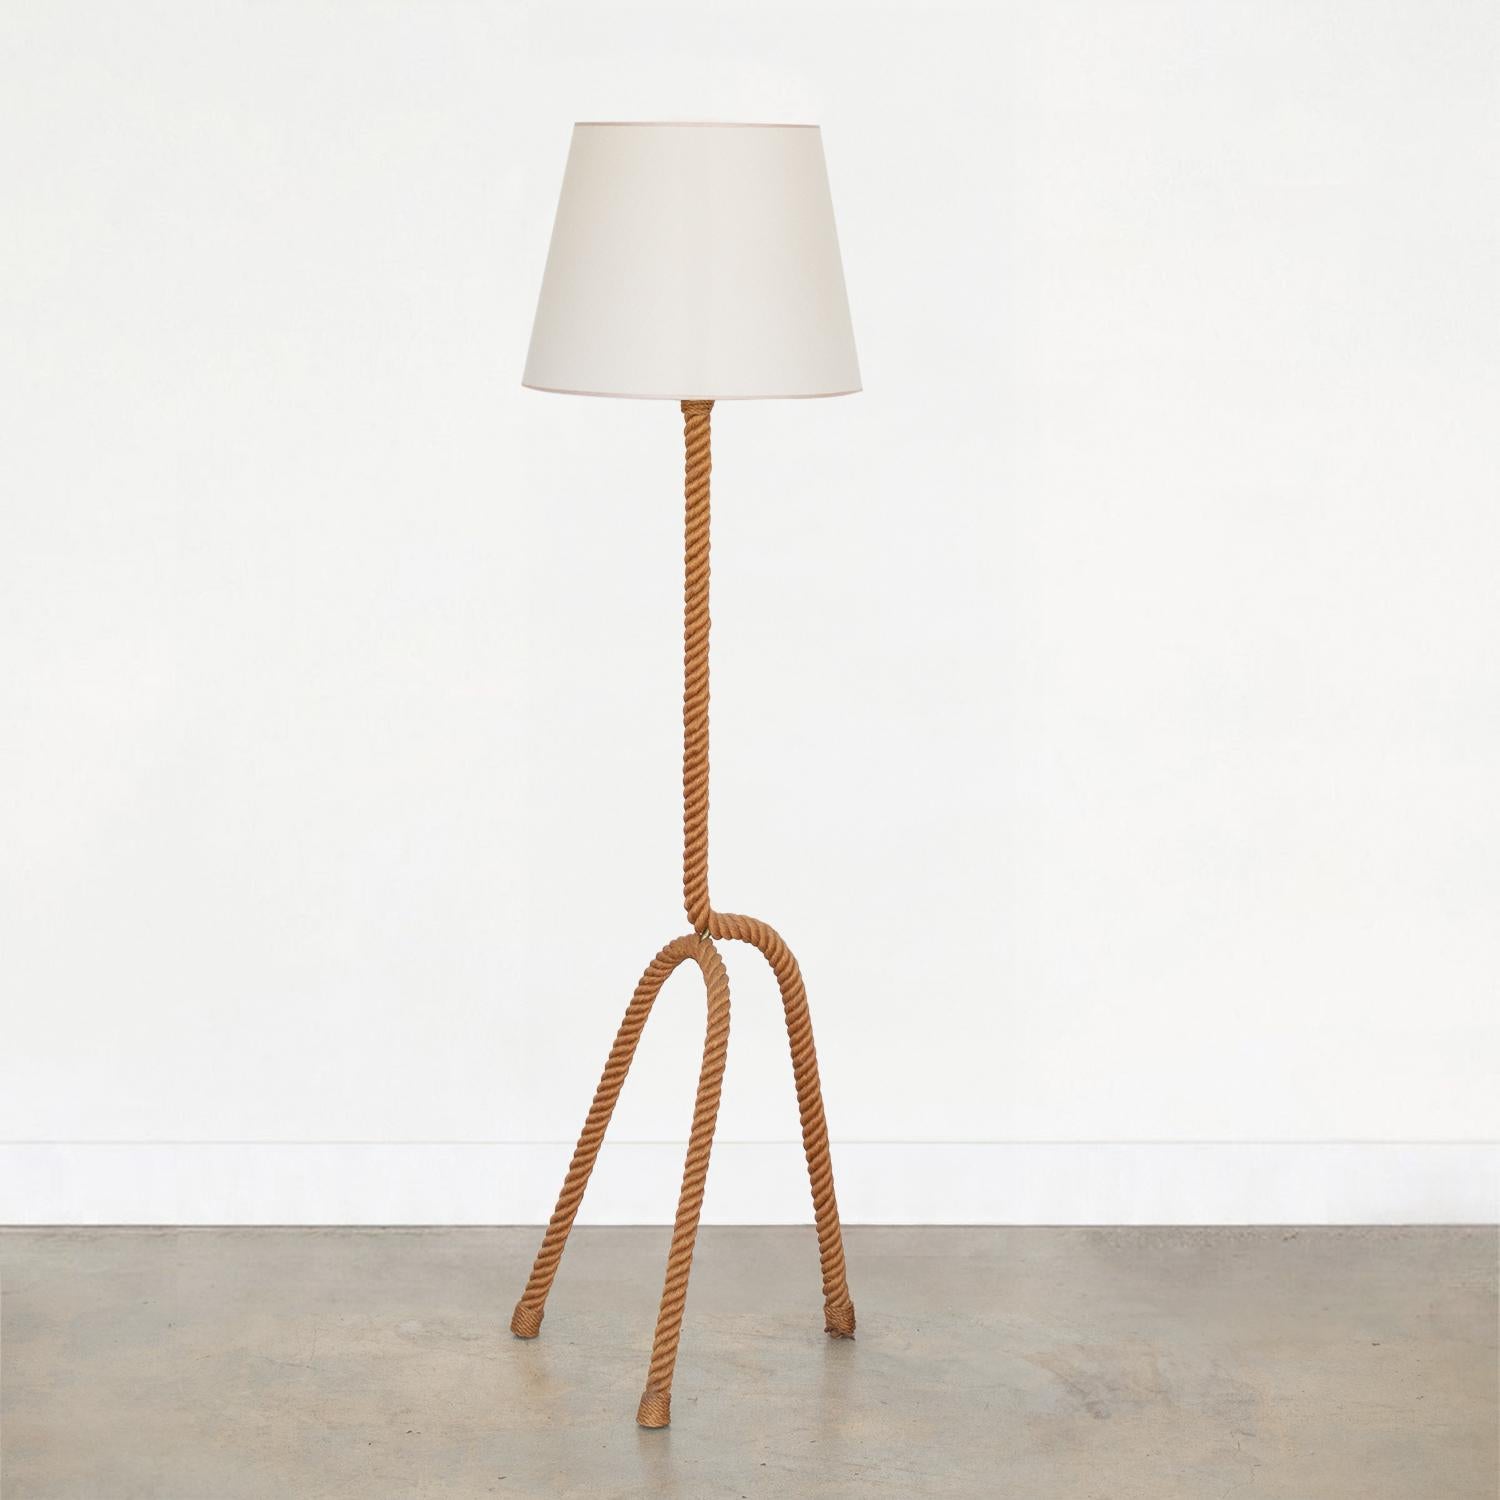 Incredible rope floor lamp by French designers Adrien Audoux and Freda Minet. Beautiful tripod base and stem in wrapped rope. New tapered linen shade with tan trim detail and newly re-wired. Original rope shows great patina and age. Takes one E26